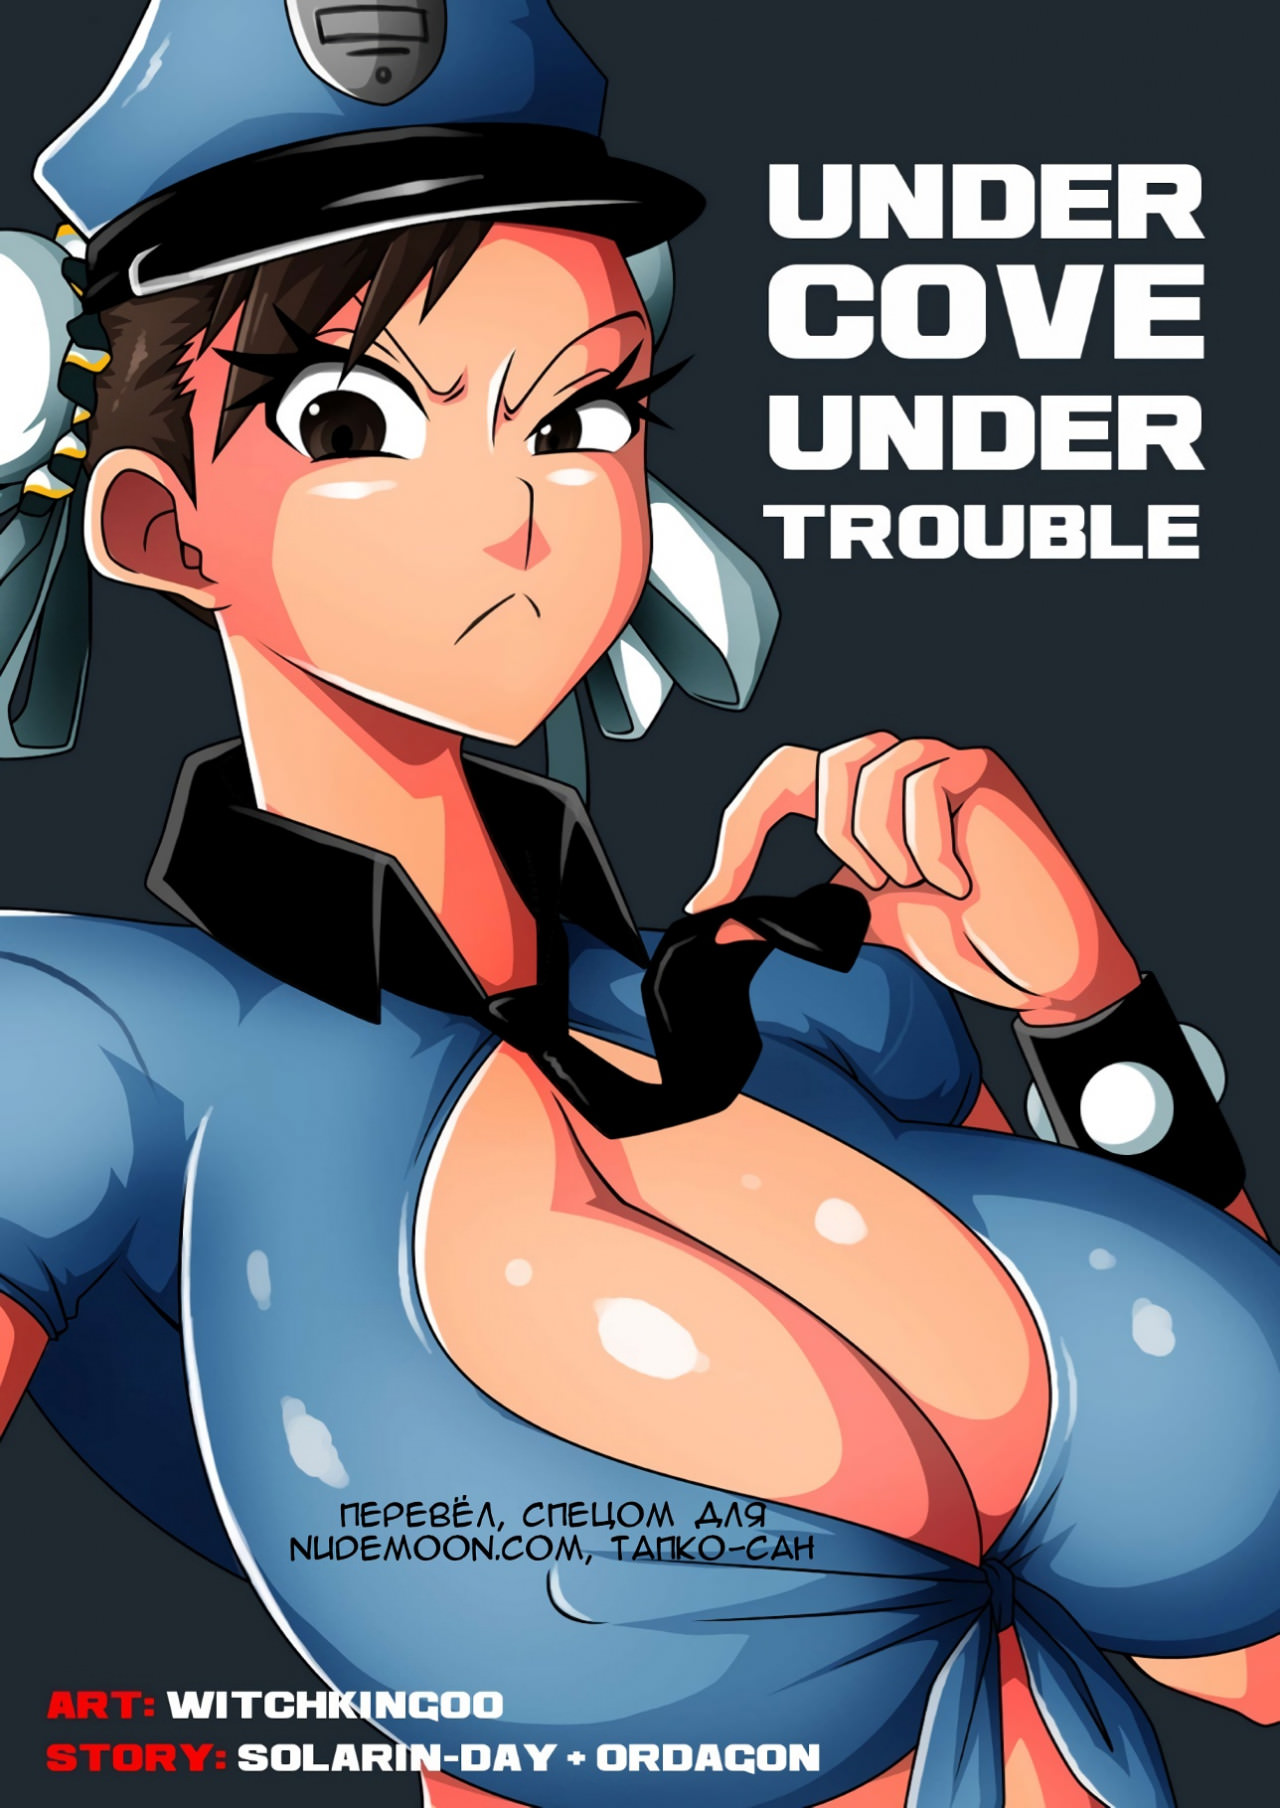 Under Cove Under Trouble